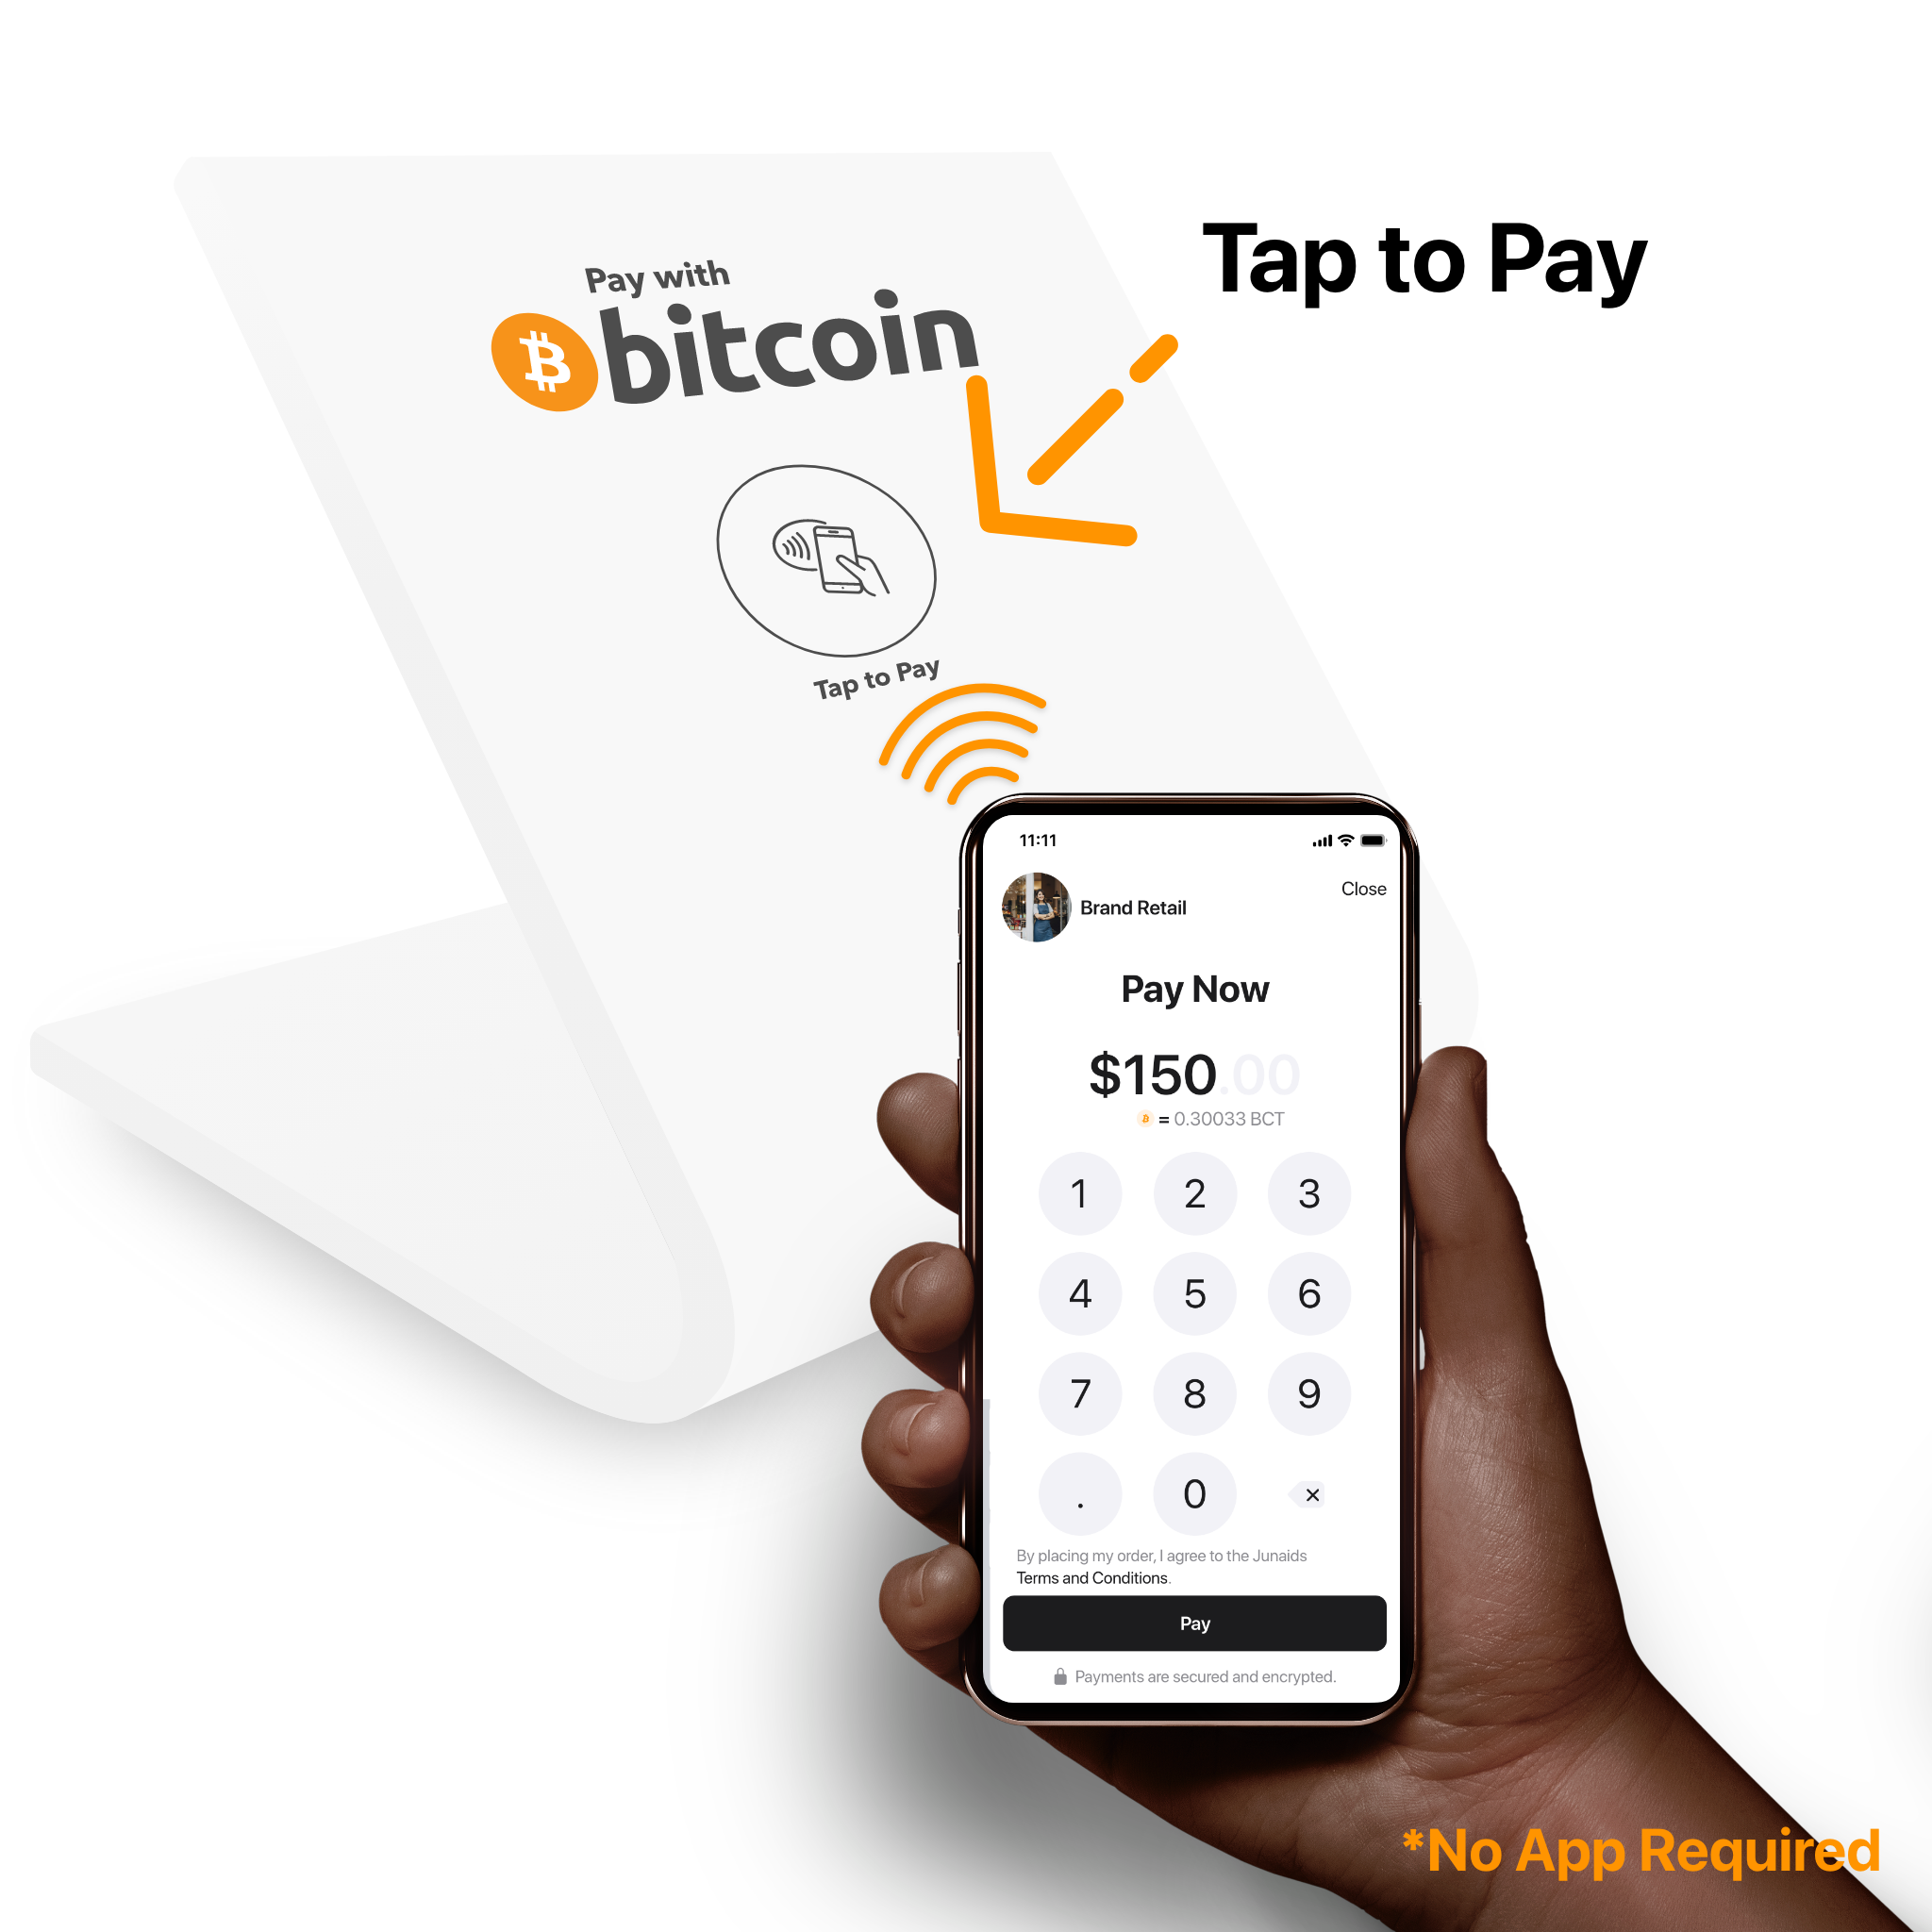 How Tap to Pay works - Bitcoin 2 – 2